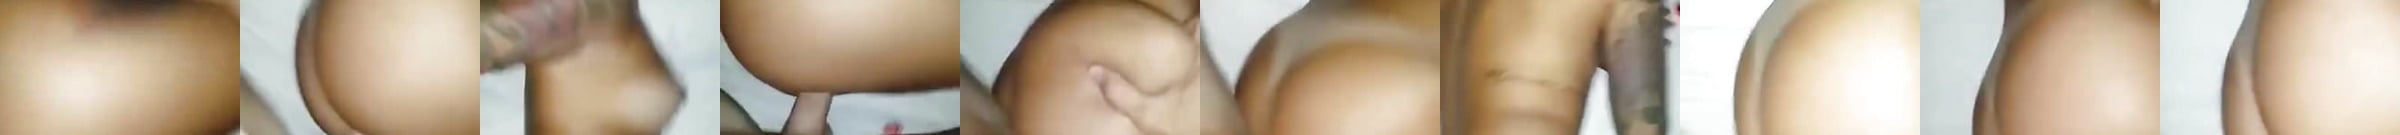 Featured Argentinian Porn Videos 8 Xhamster